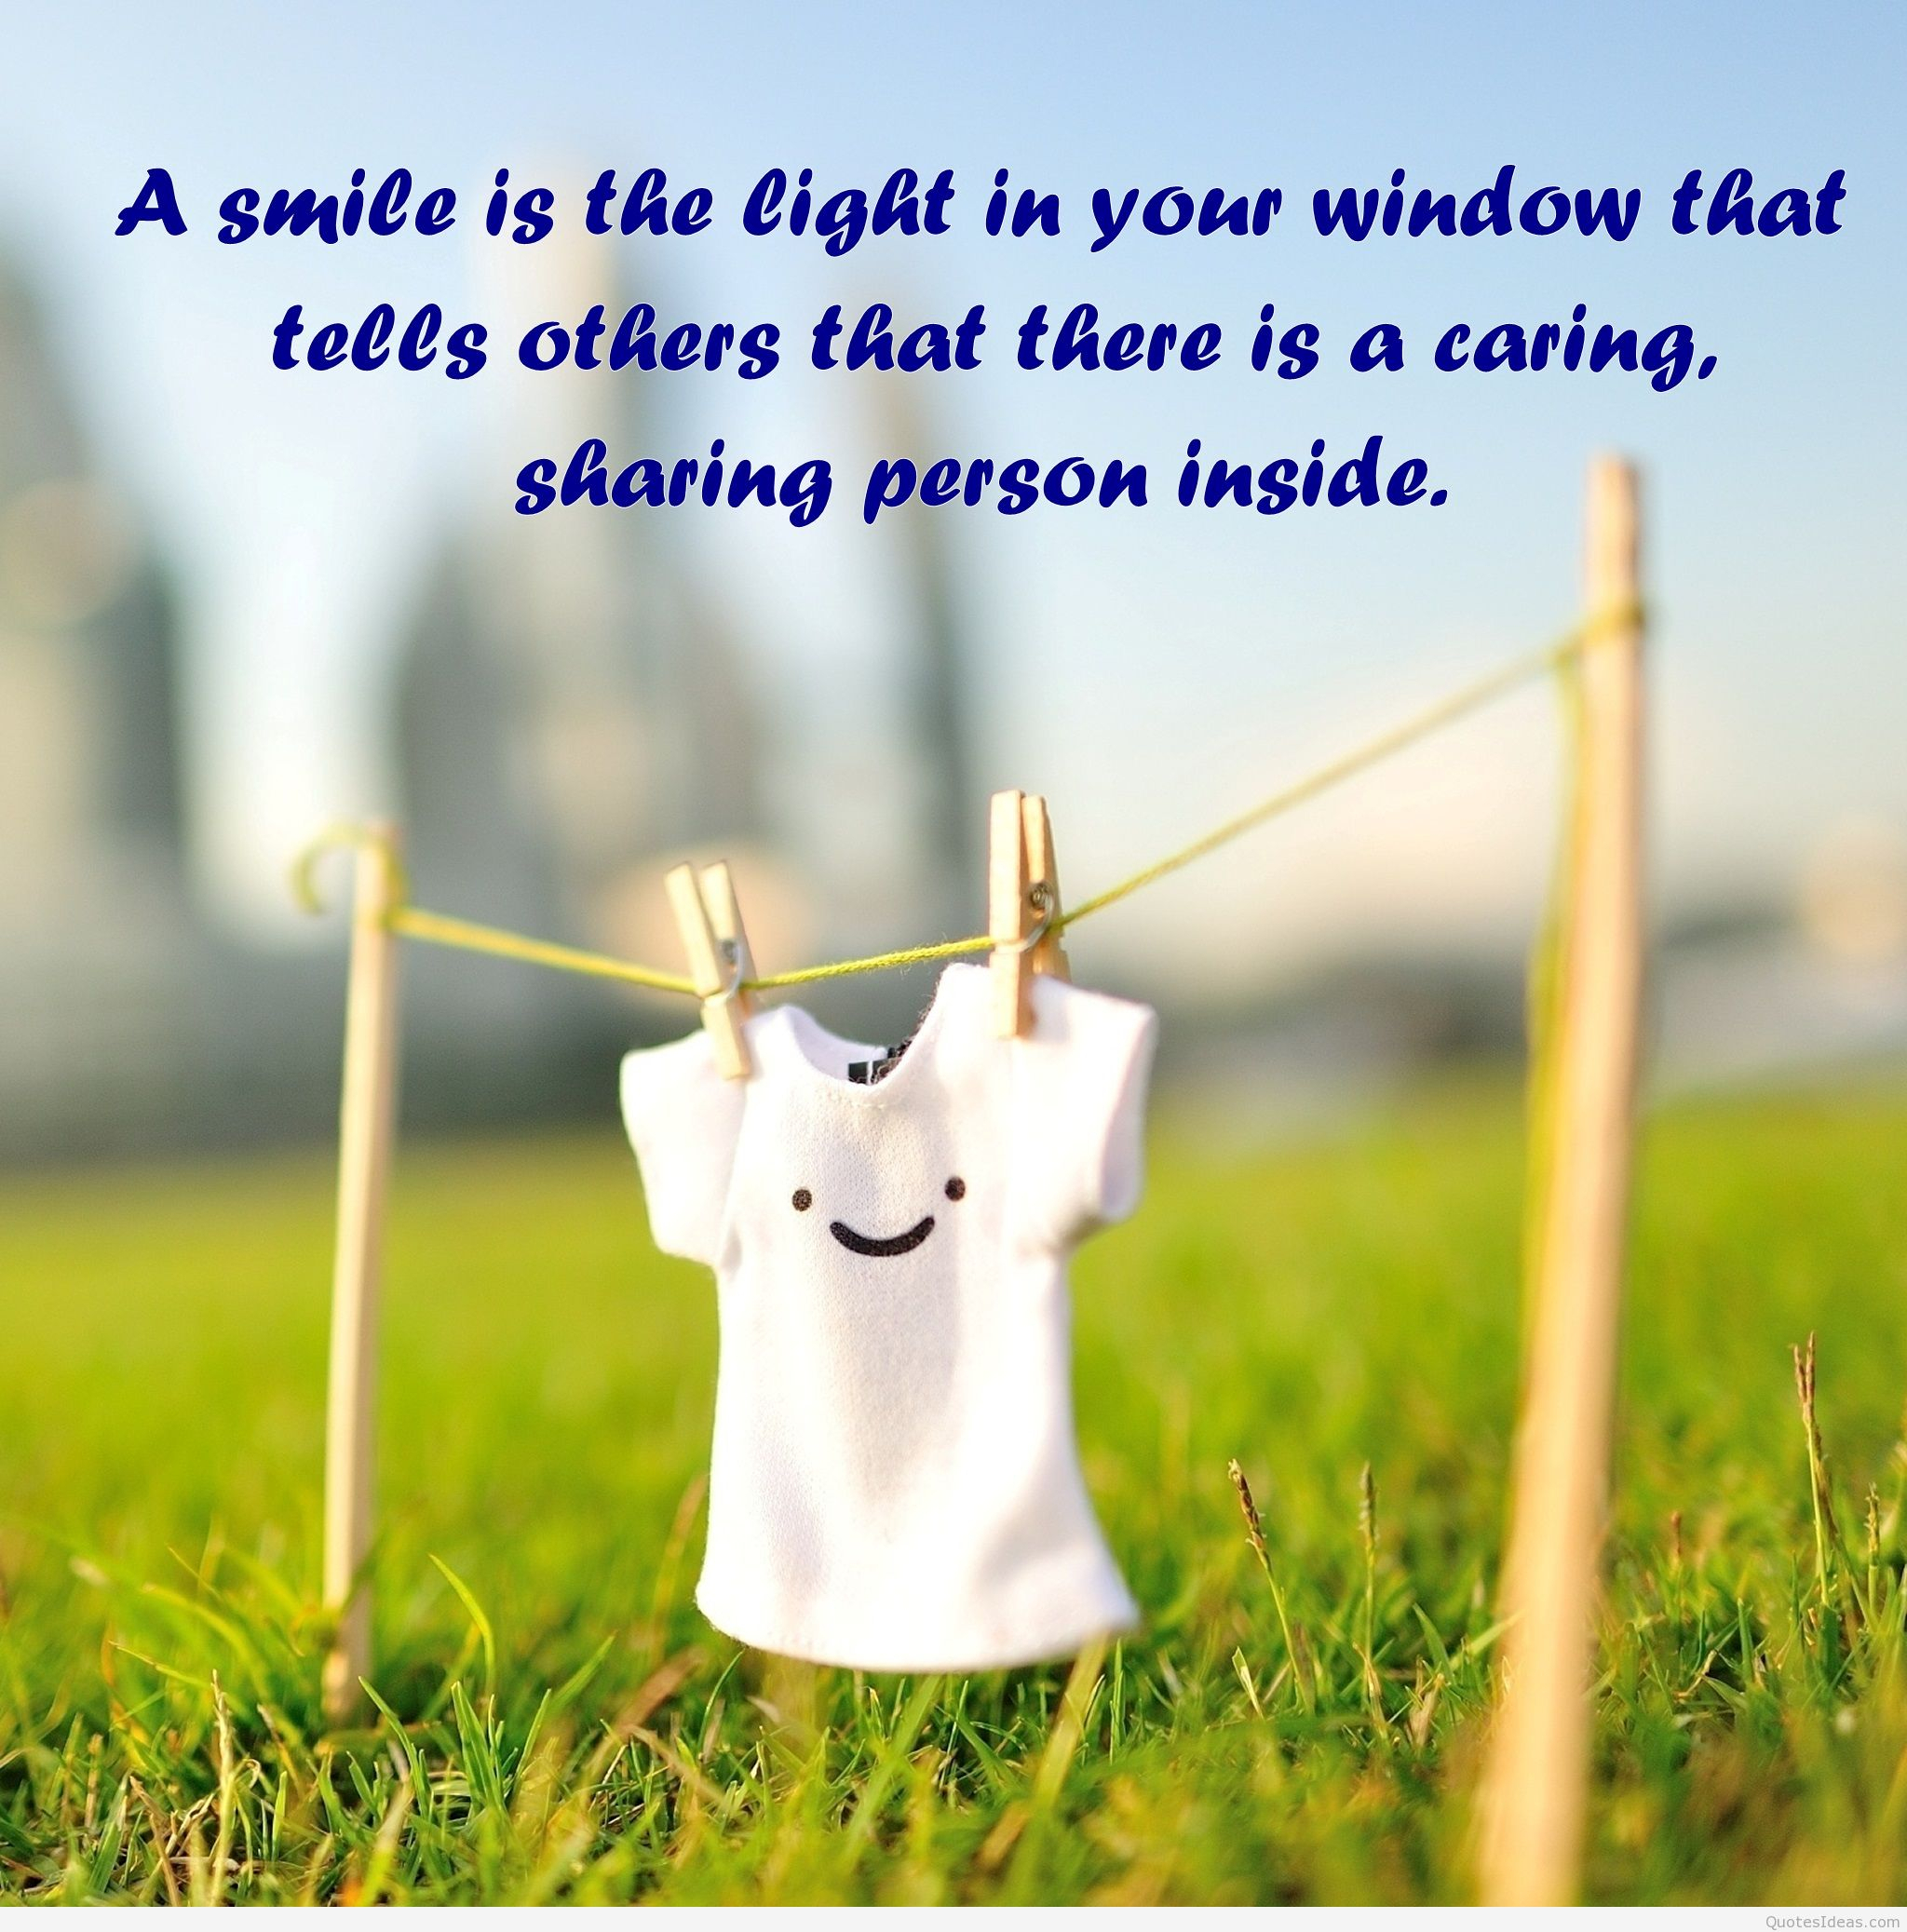 Quote About Smiles And Happiness Smile Quotes Wallpaper Image